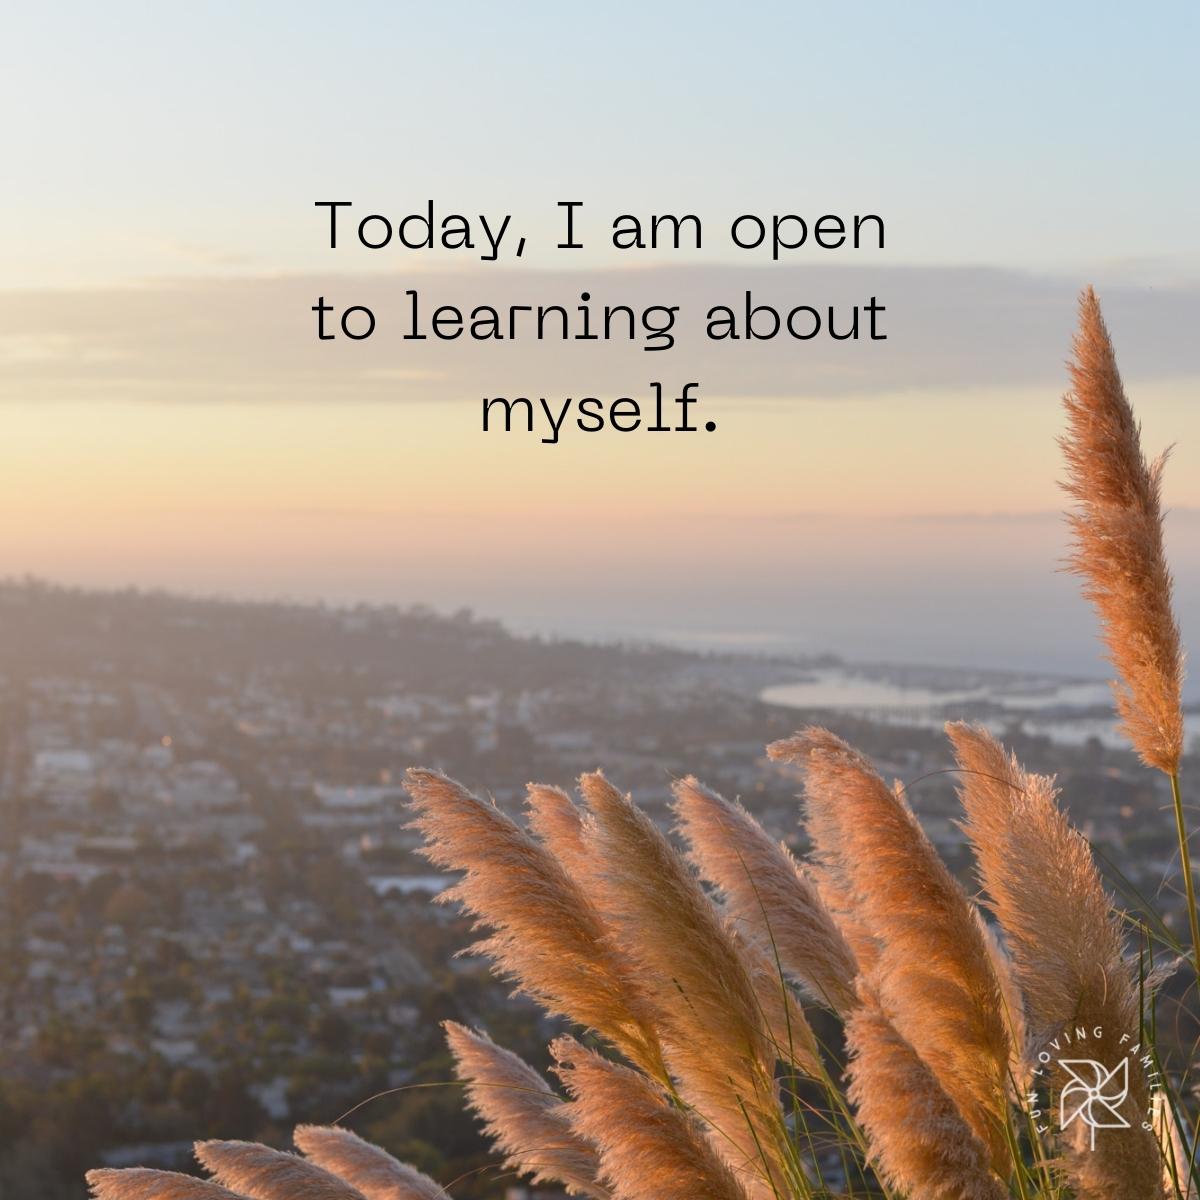 Today, I am open to learning about myself affirmation